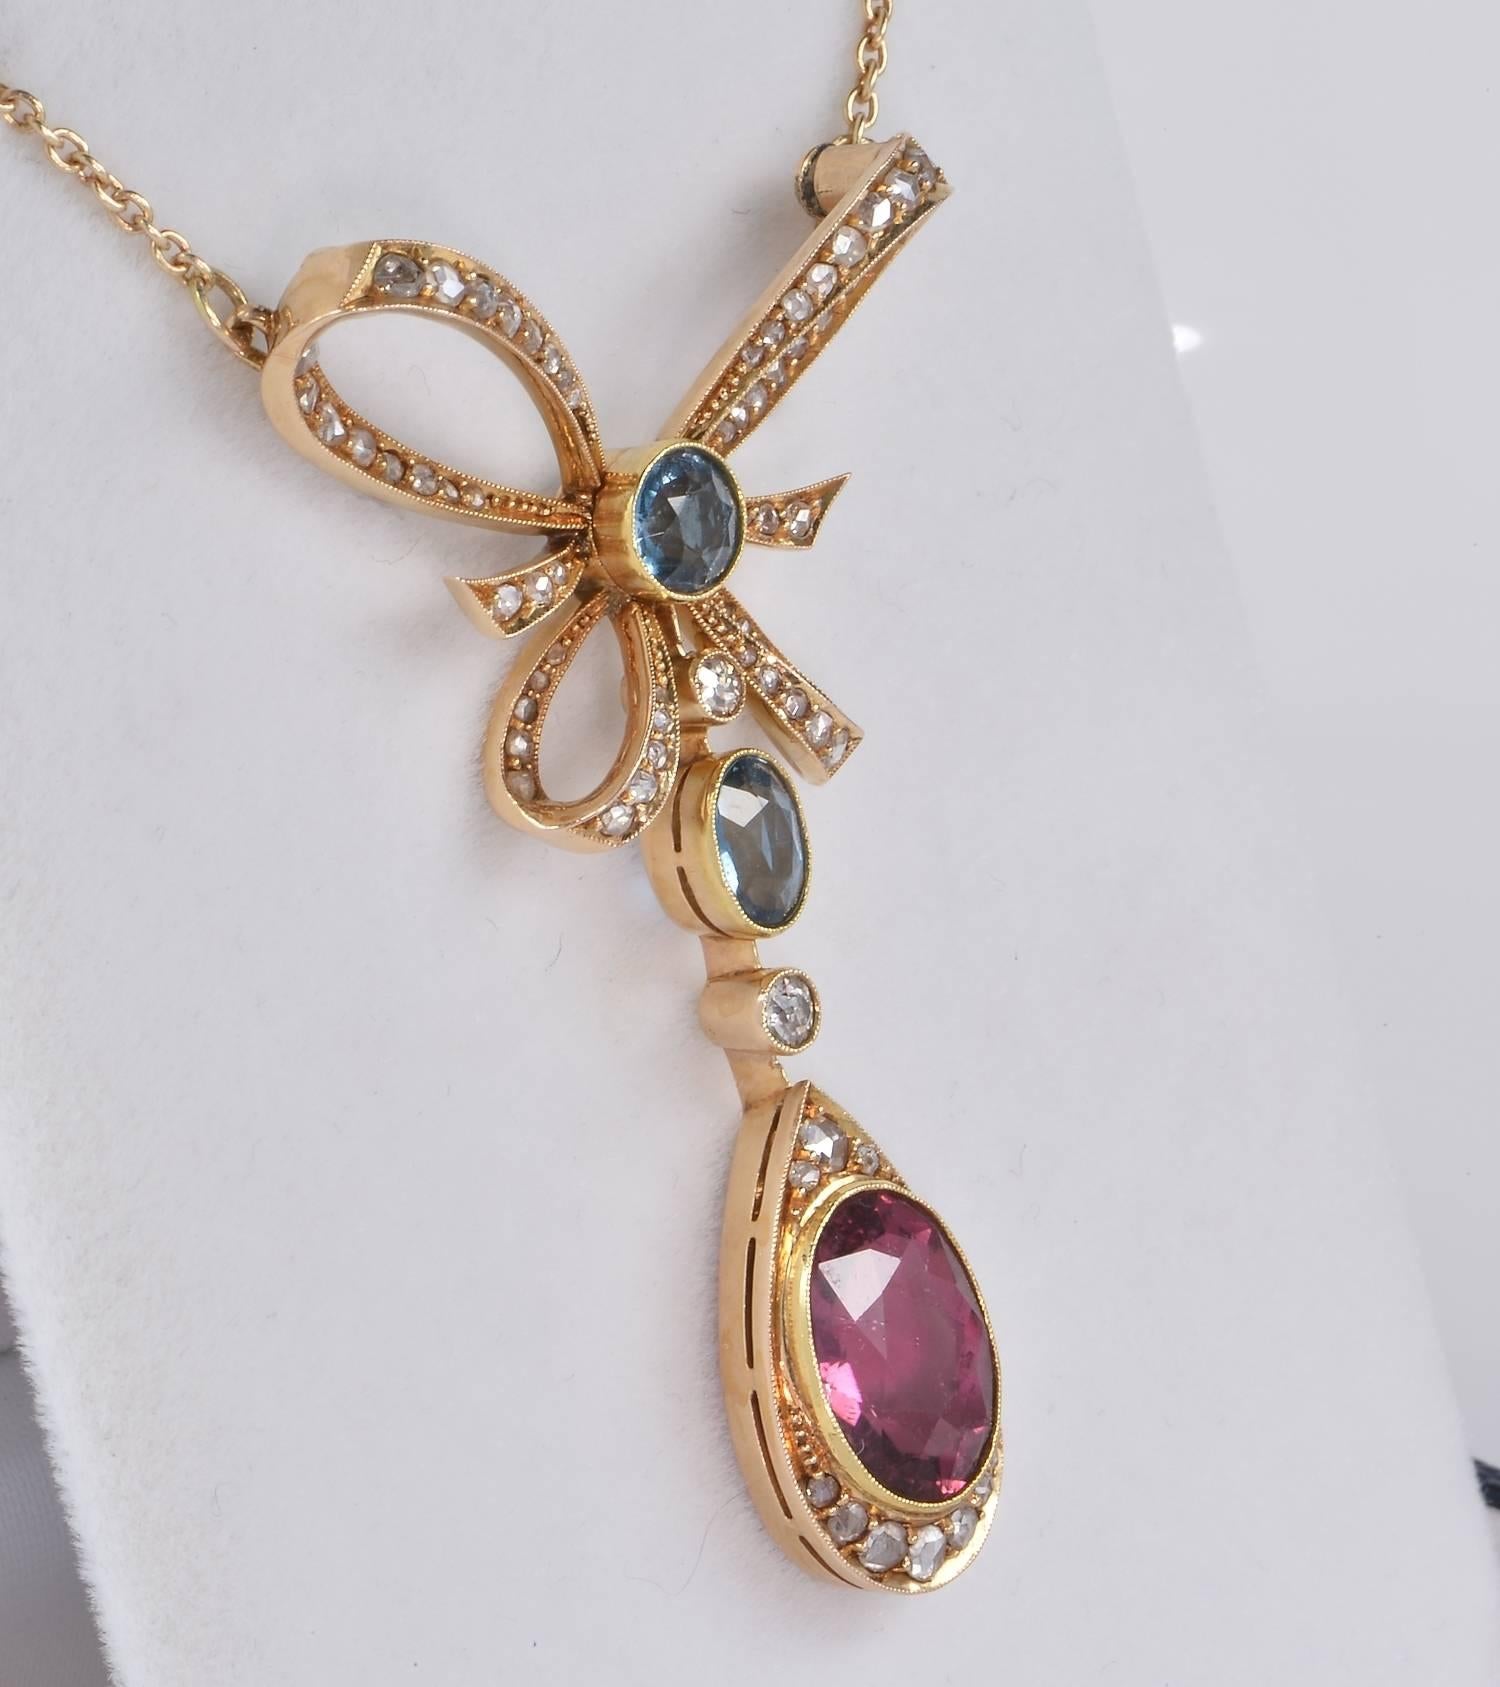 An authentic Edwardian period pendant necklace, romantic bow design beautifully crafted during 1900 ca.
made of solid 18 Kt gold, not marked.

Charming composition of top bow with suspending drop, lovely when worn.

Boasting a Natural not treated